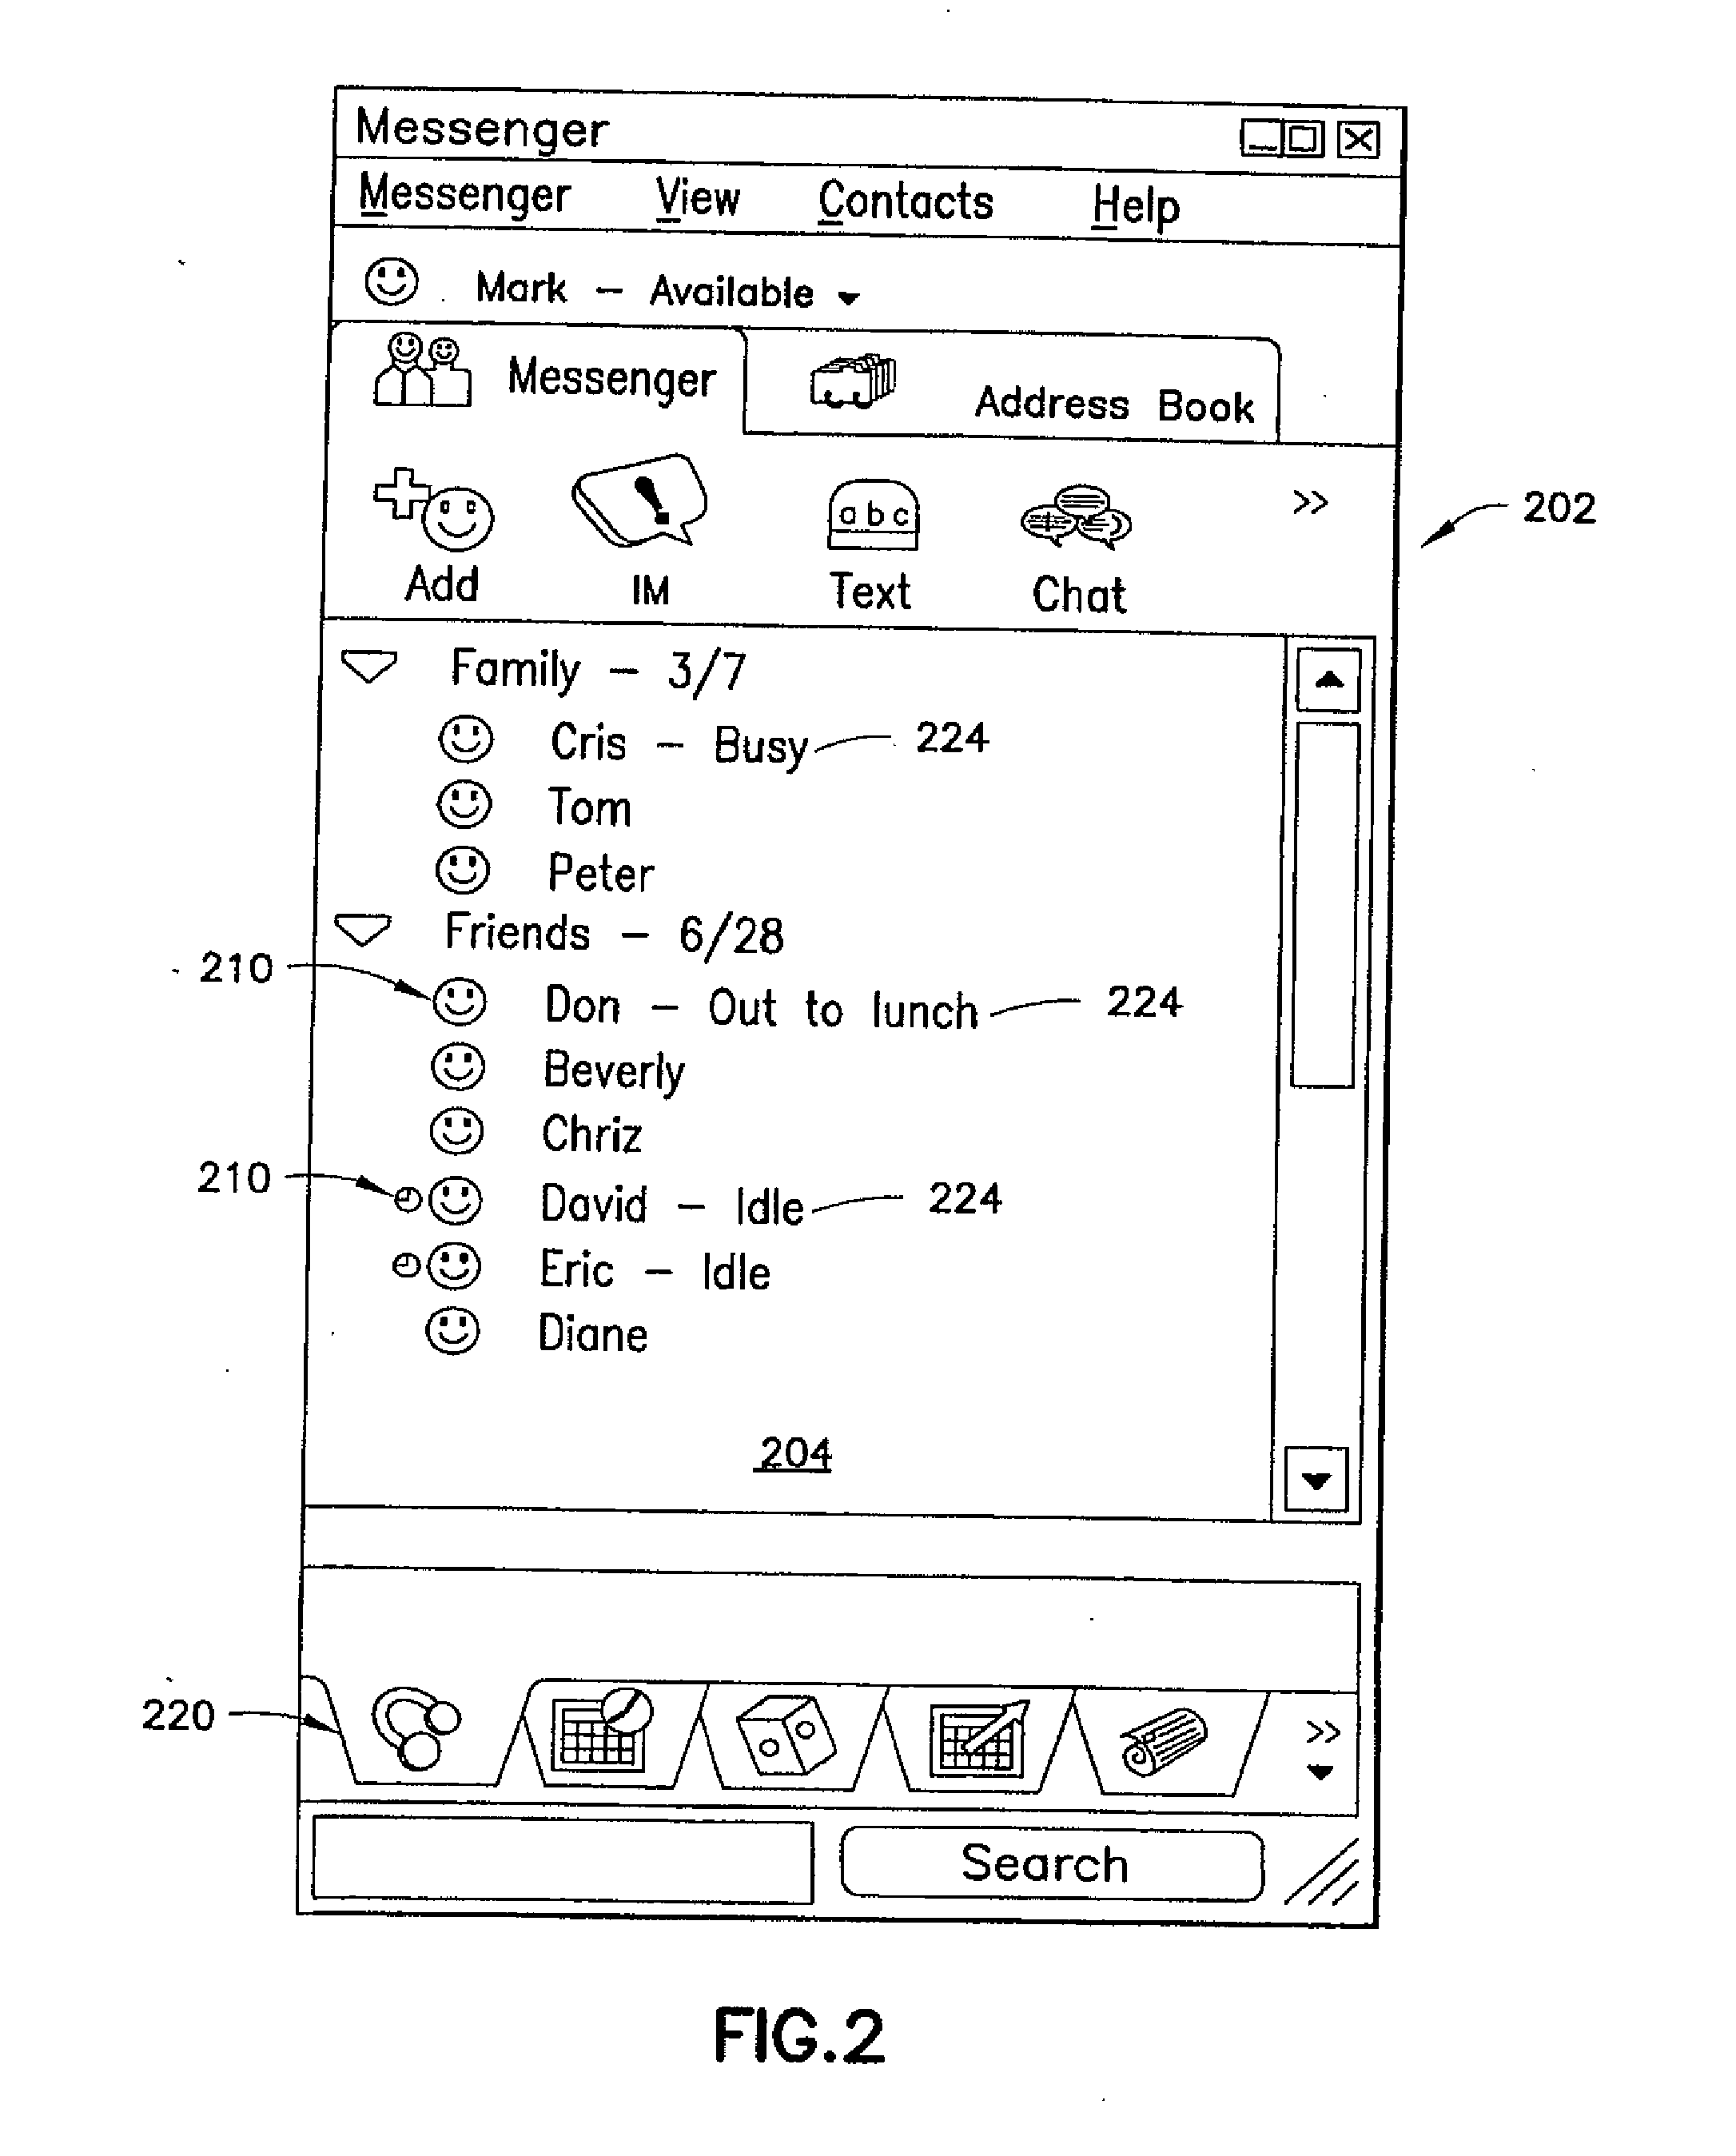 System and method for enhanced messaging and commerce